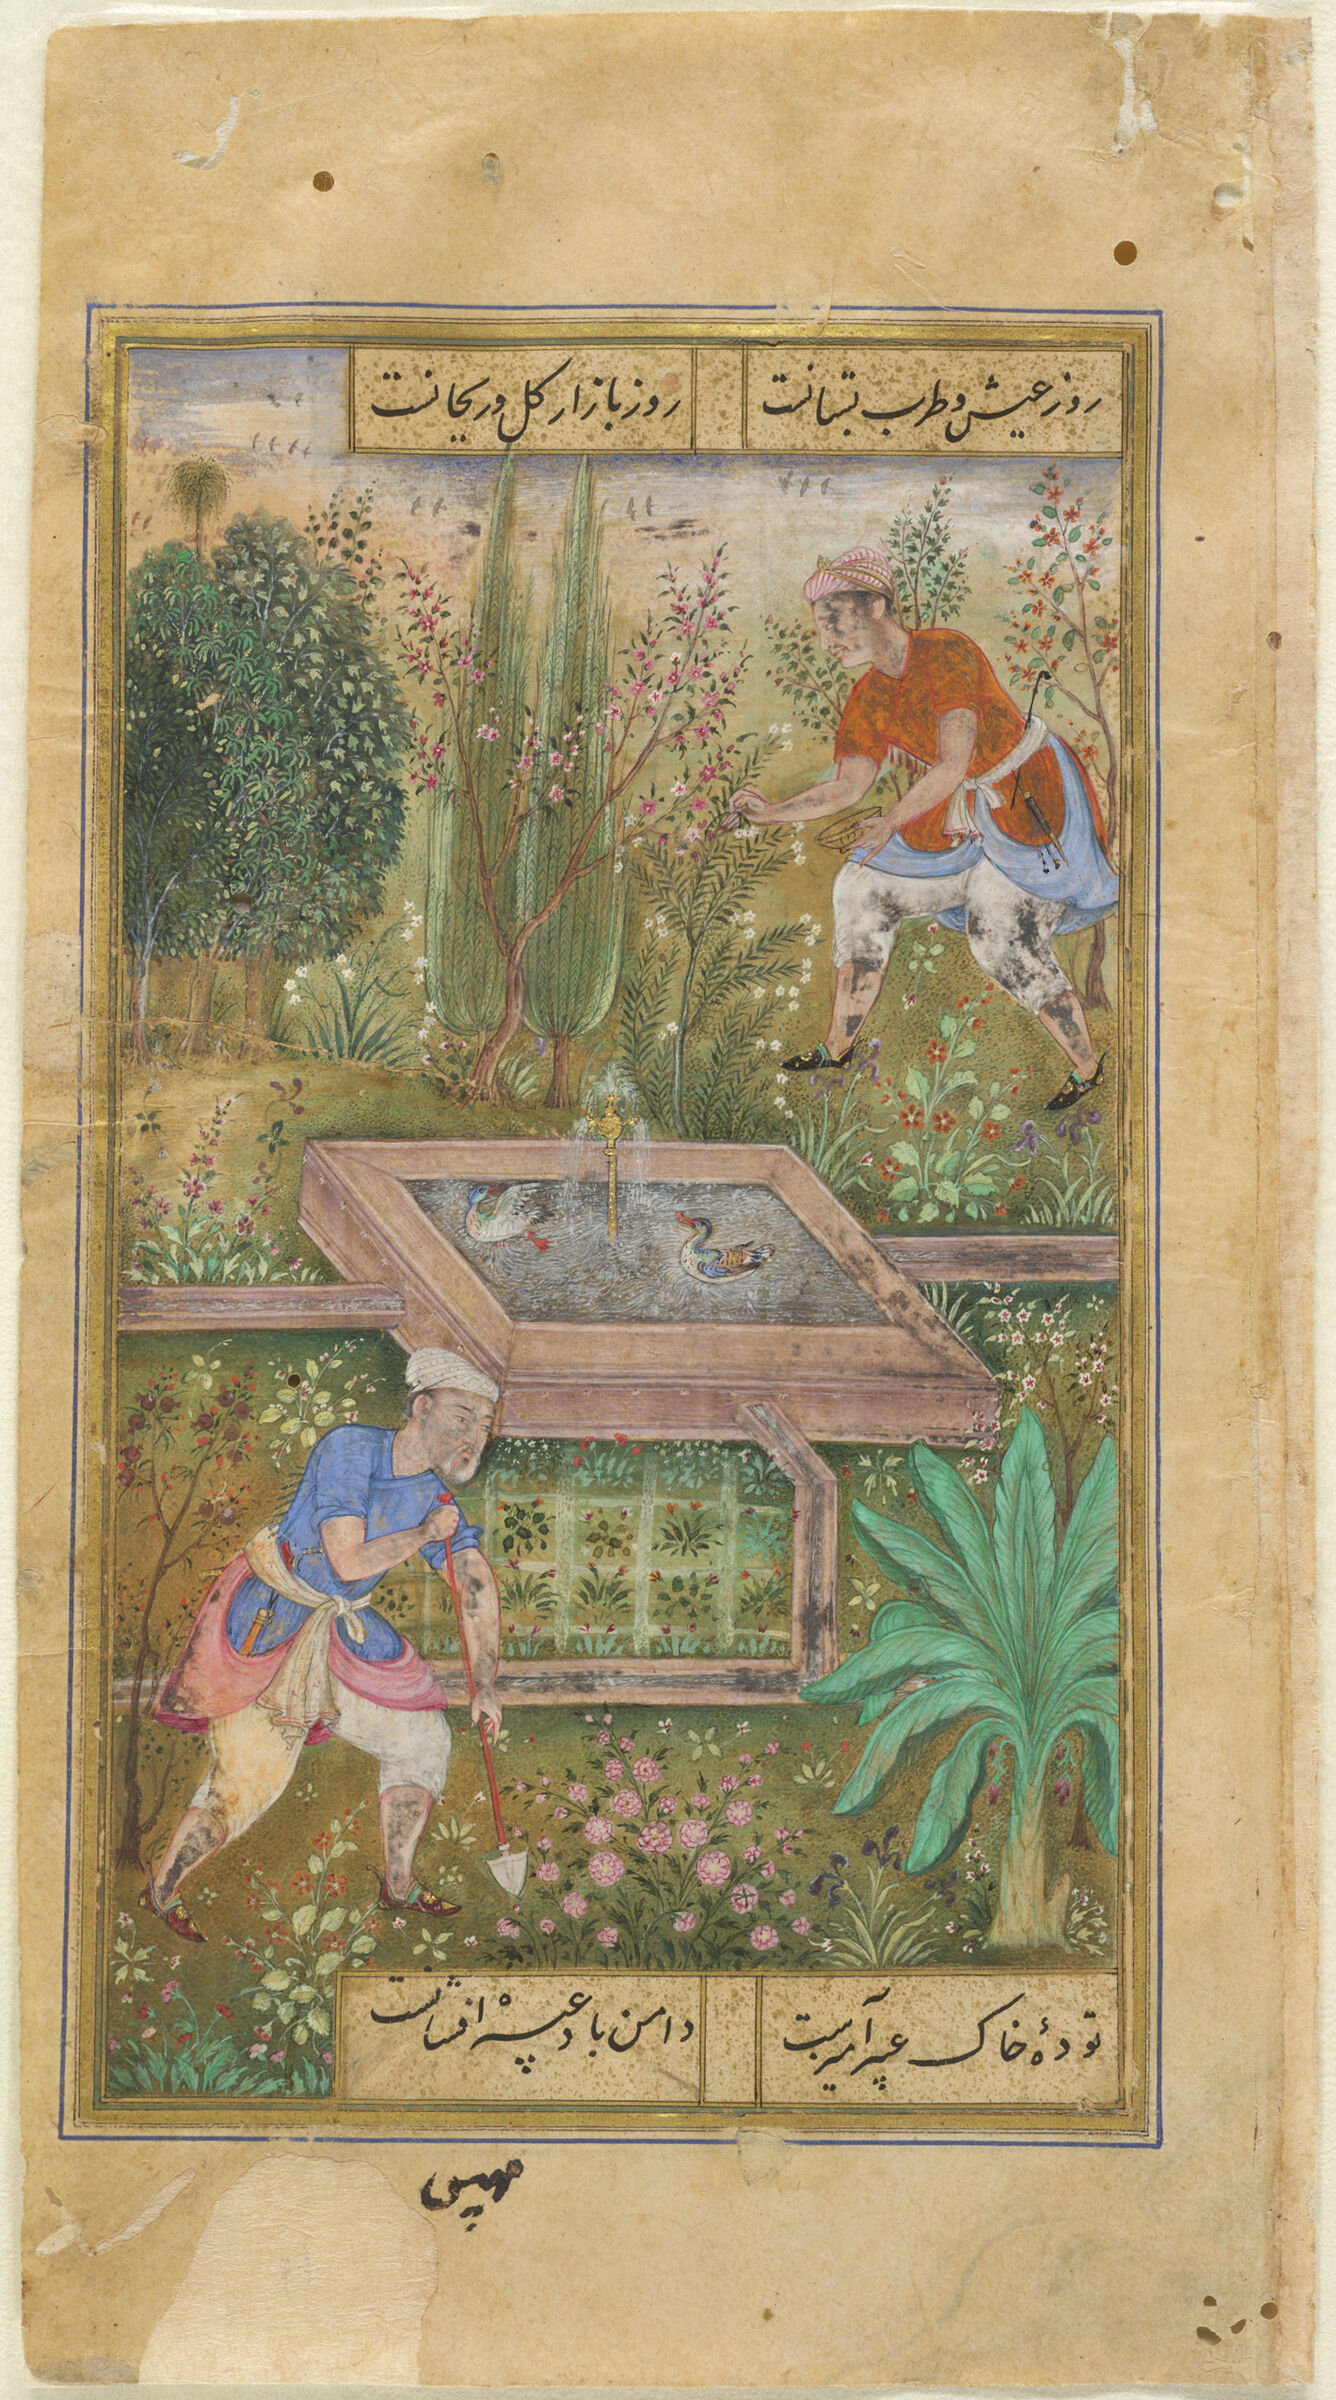 It's The Day For The Garden (Painting, Recto; Text, Verso), Folio 173 From A Manuscript Of The Divan (Collection Of Works) Of Anvari